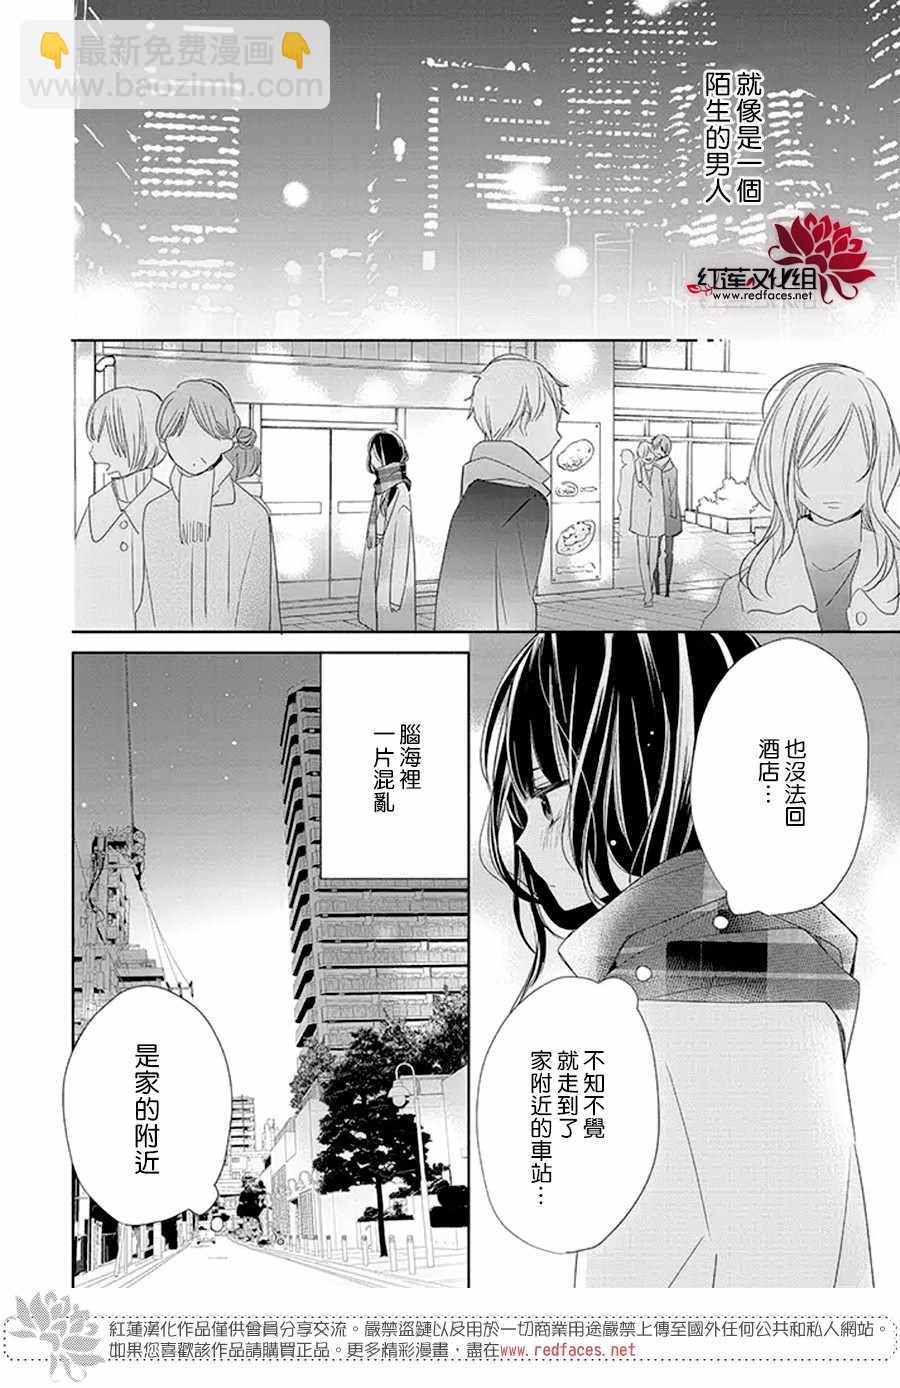 If given a second chance - 18話 - 5